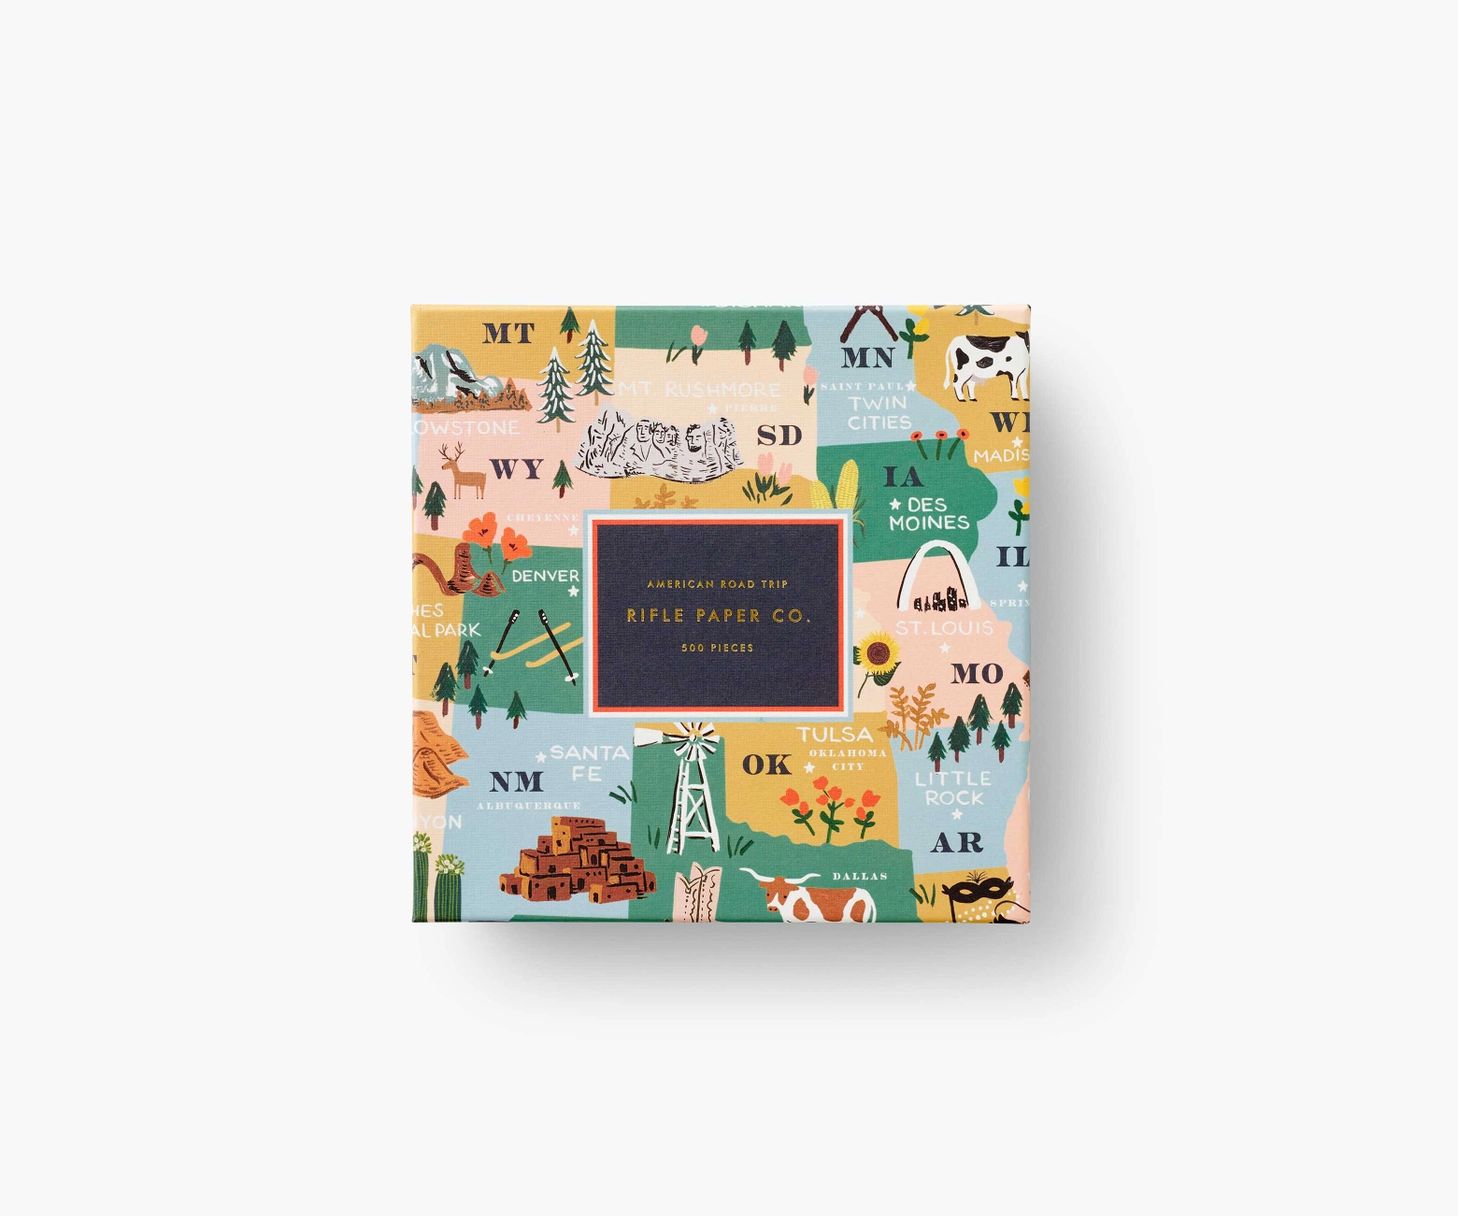 American Road Trip Jigsaw Puzzle | Rifle Paper Co.